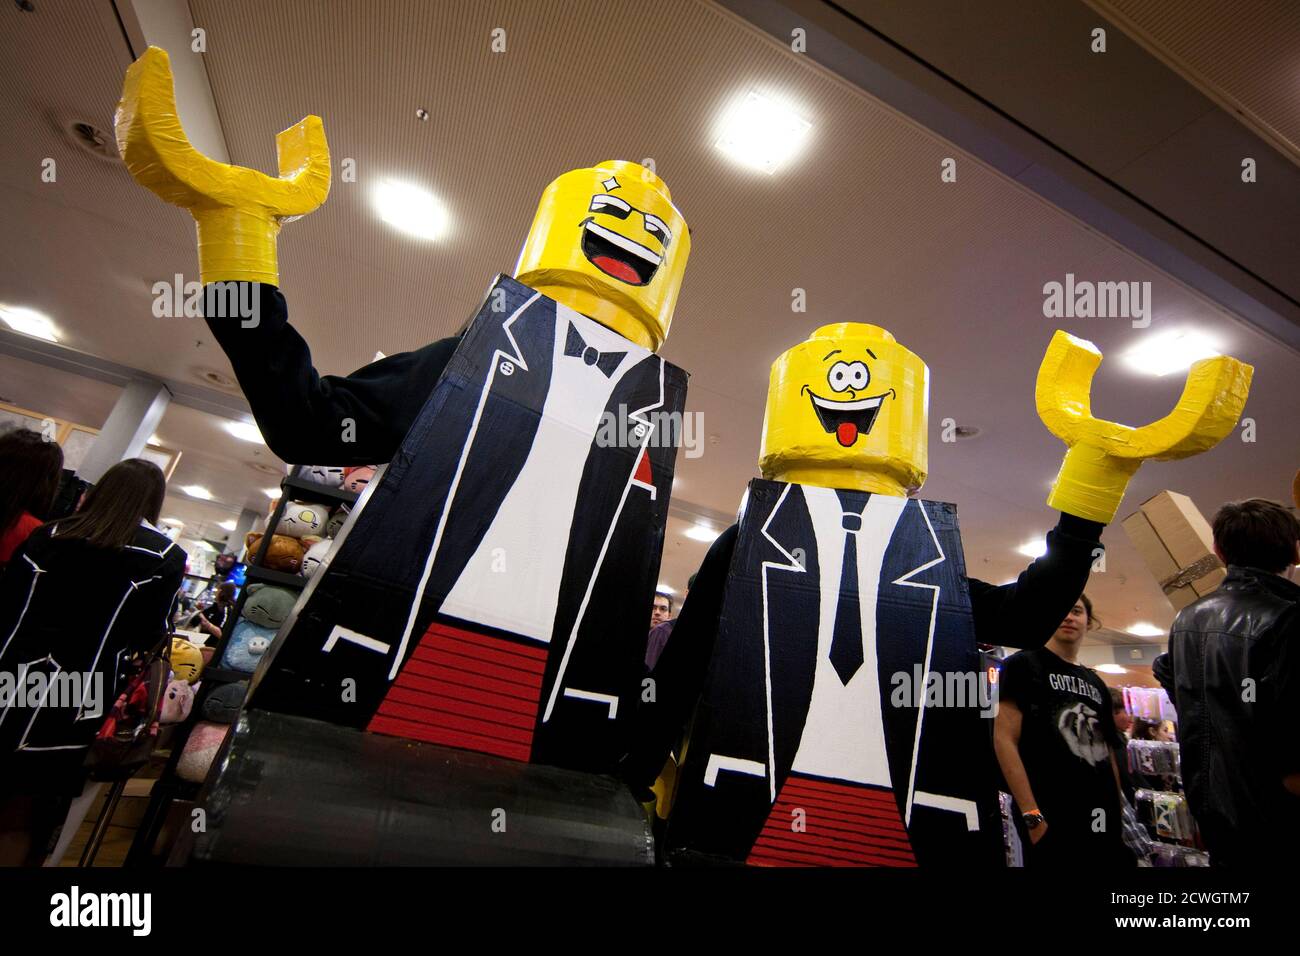 Visitors wearing Lego toy costumes pose at the Polymanga show in Lausanne,  April 7, 2012. Polymanga is the largest manga, anime, video games and pop  culture convention in Switzerland gathering over 16,000